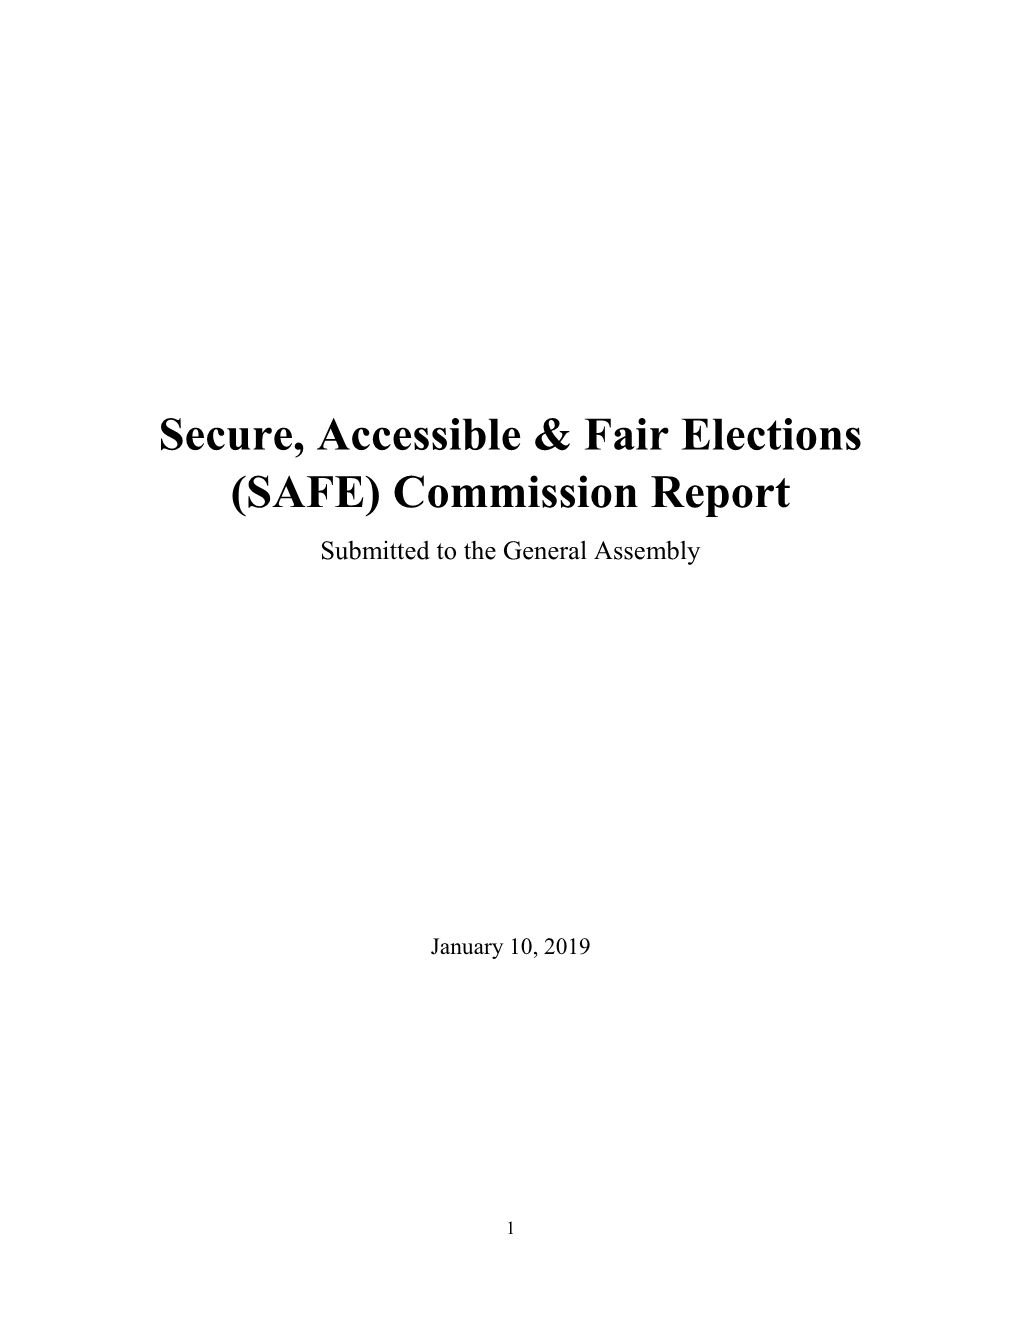 Secure, Accessible & Fair Elections (SAFE